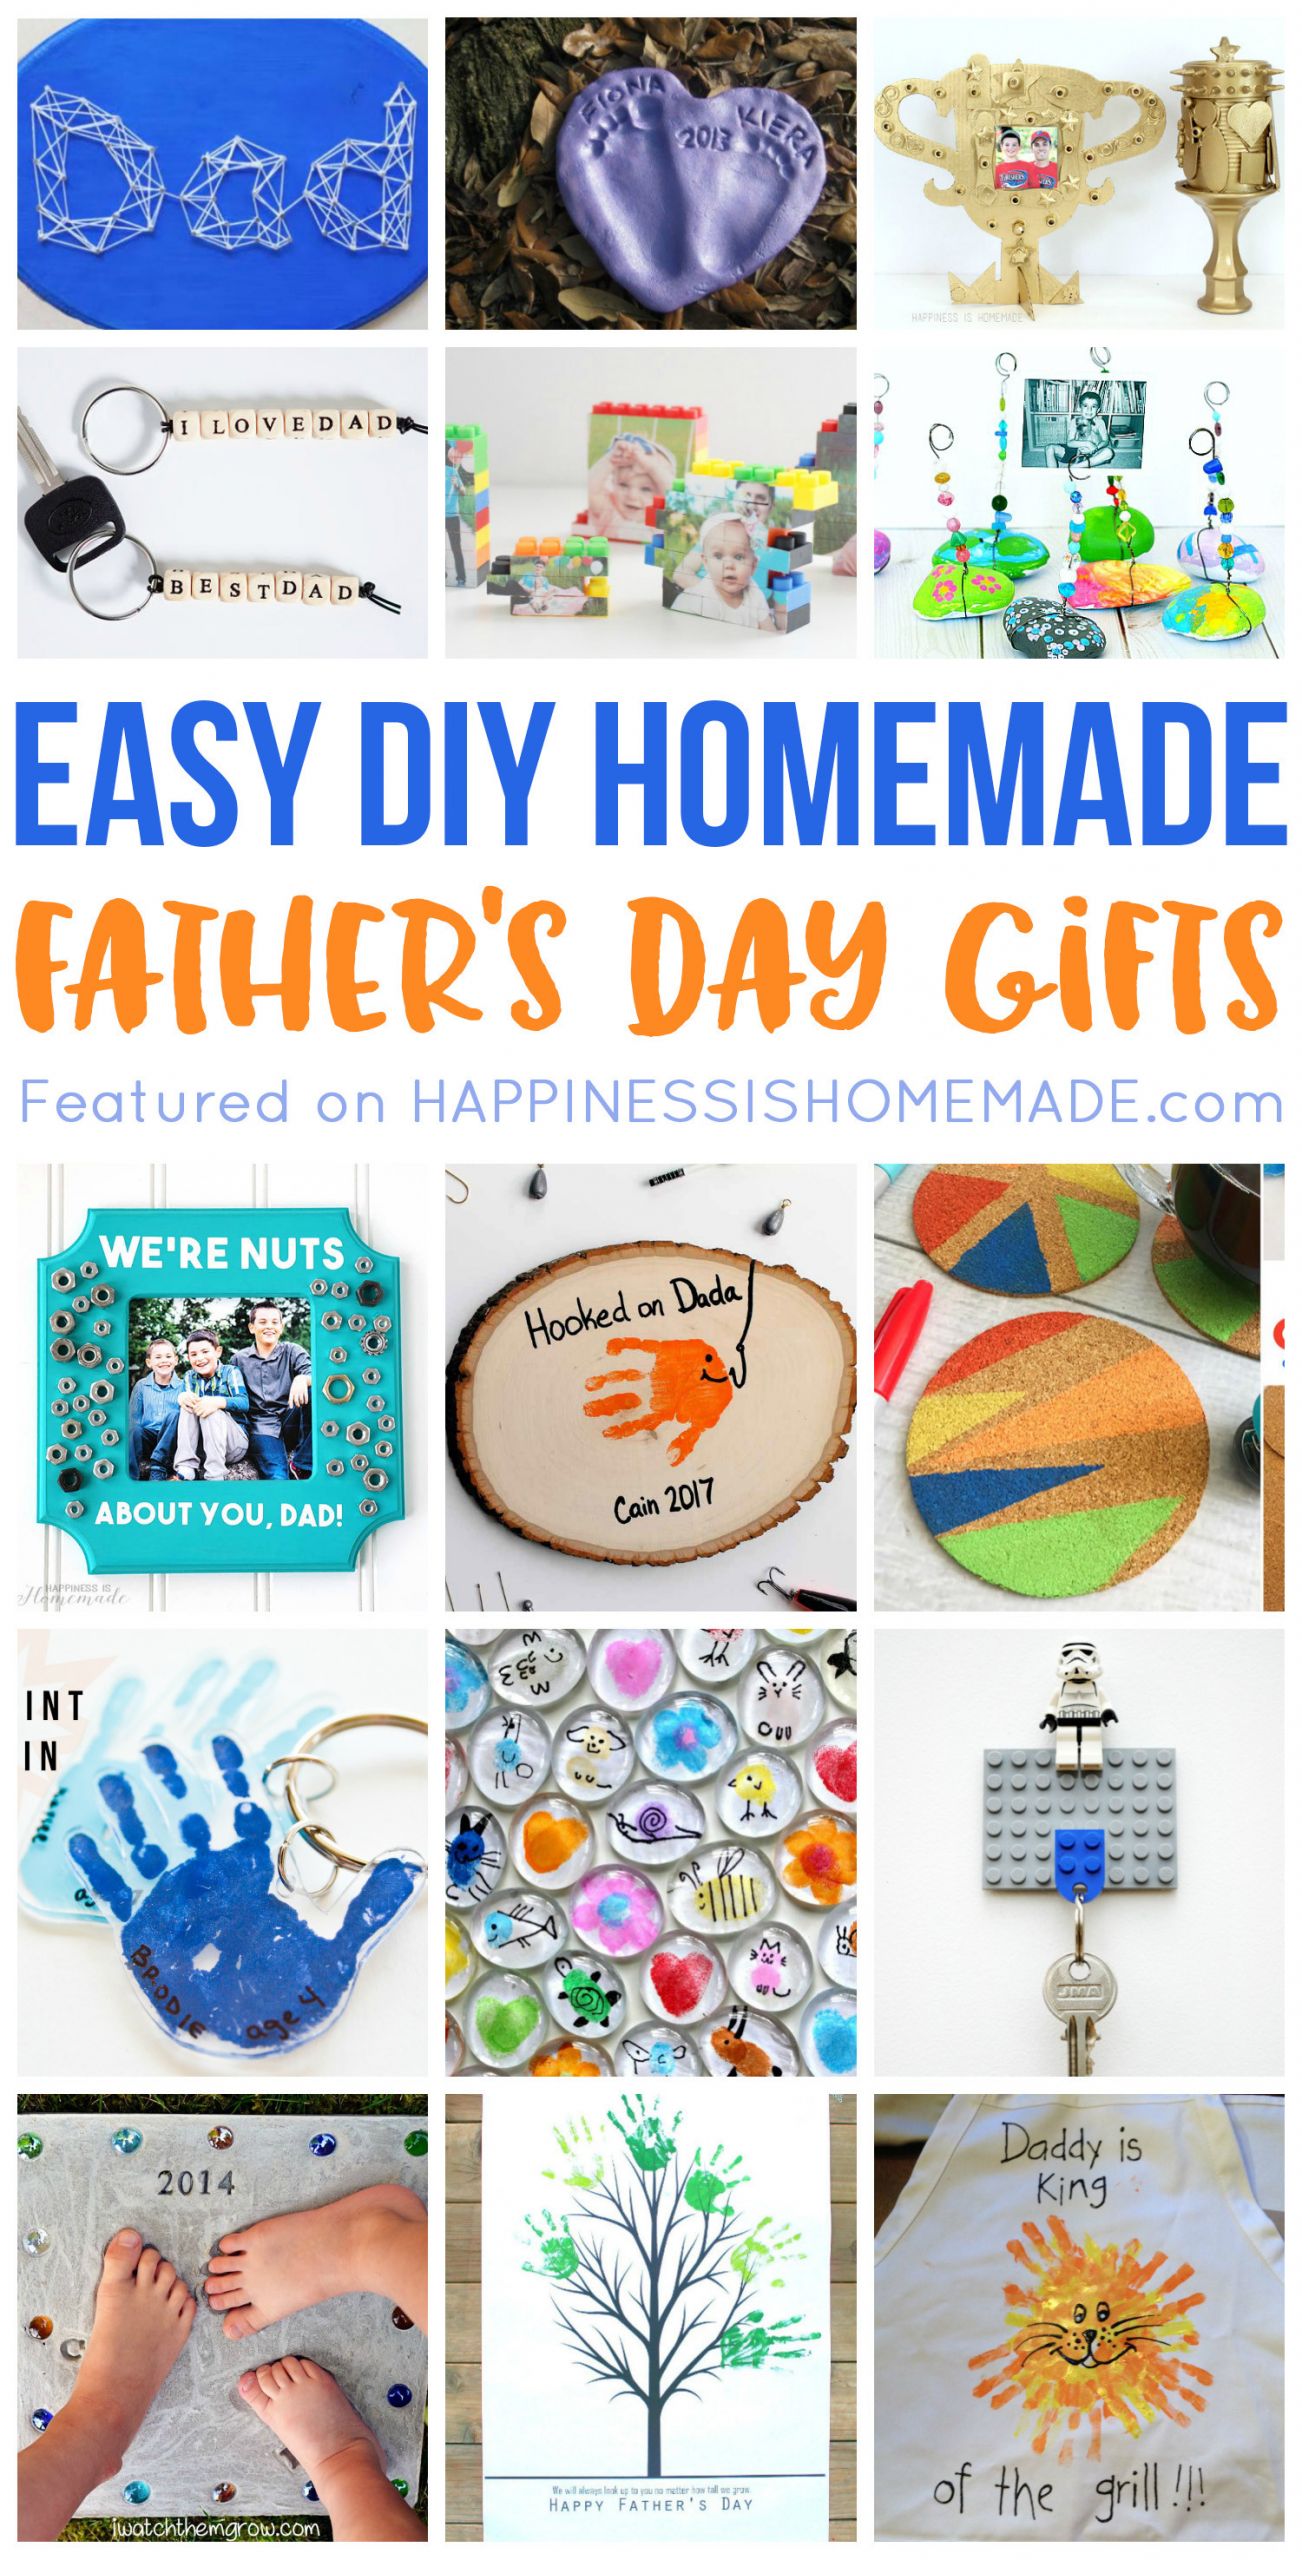 Easy Homemade Fathers Day Gifts
 20 Homemade Father s Day Gifts That Kids Can Make